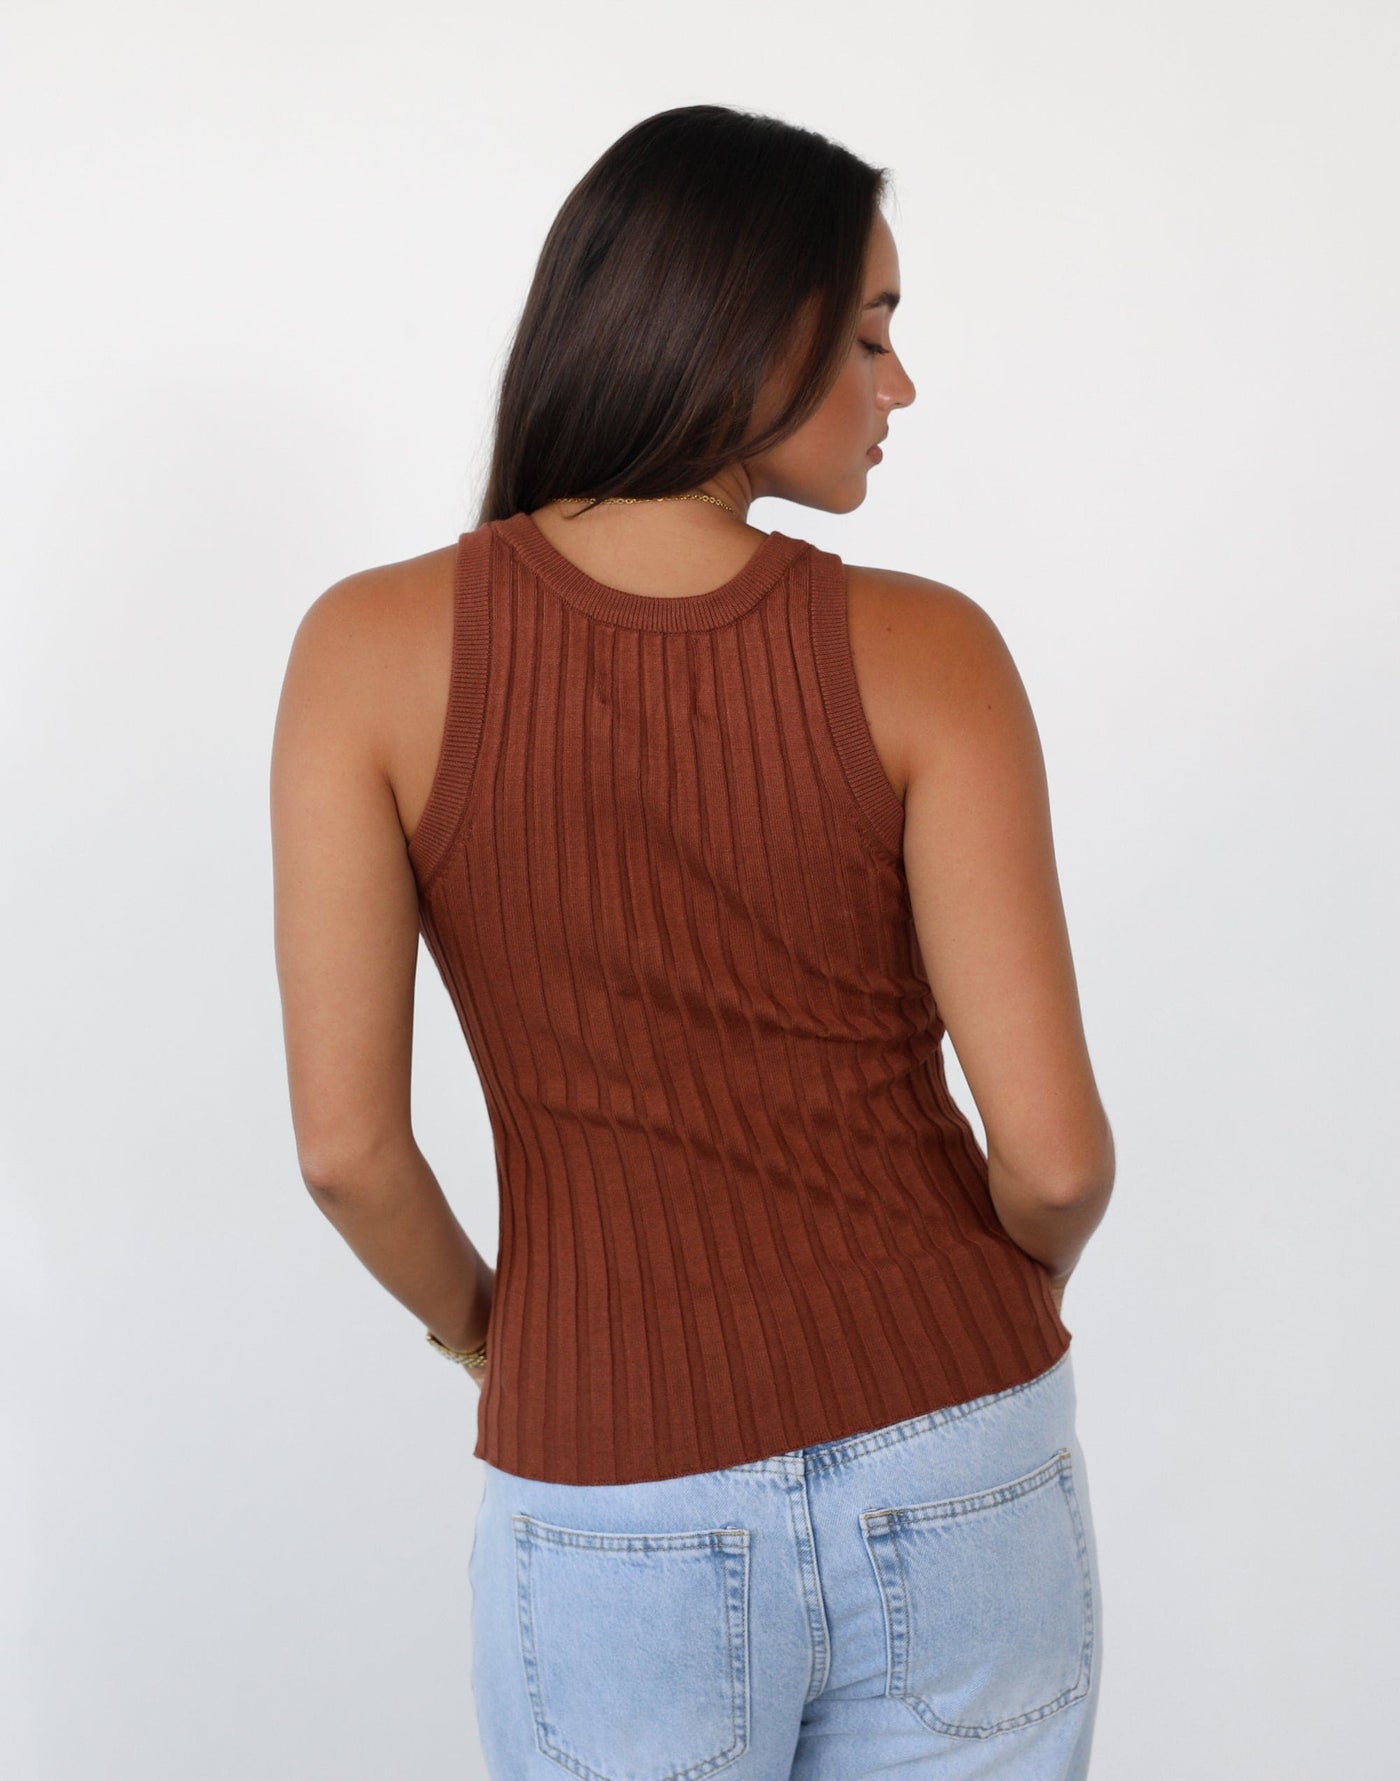 Mae Tank Top (Copper) - Ribbed Sleeveless Tank Top - Women's Top - Charcoal Clothing